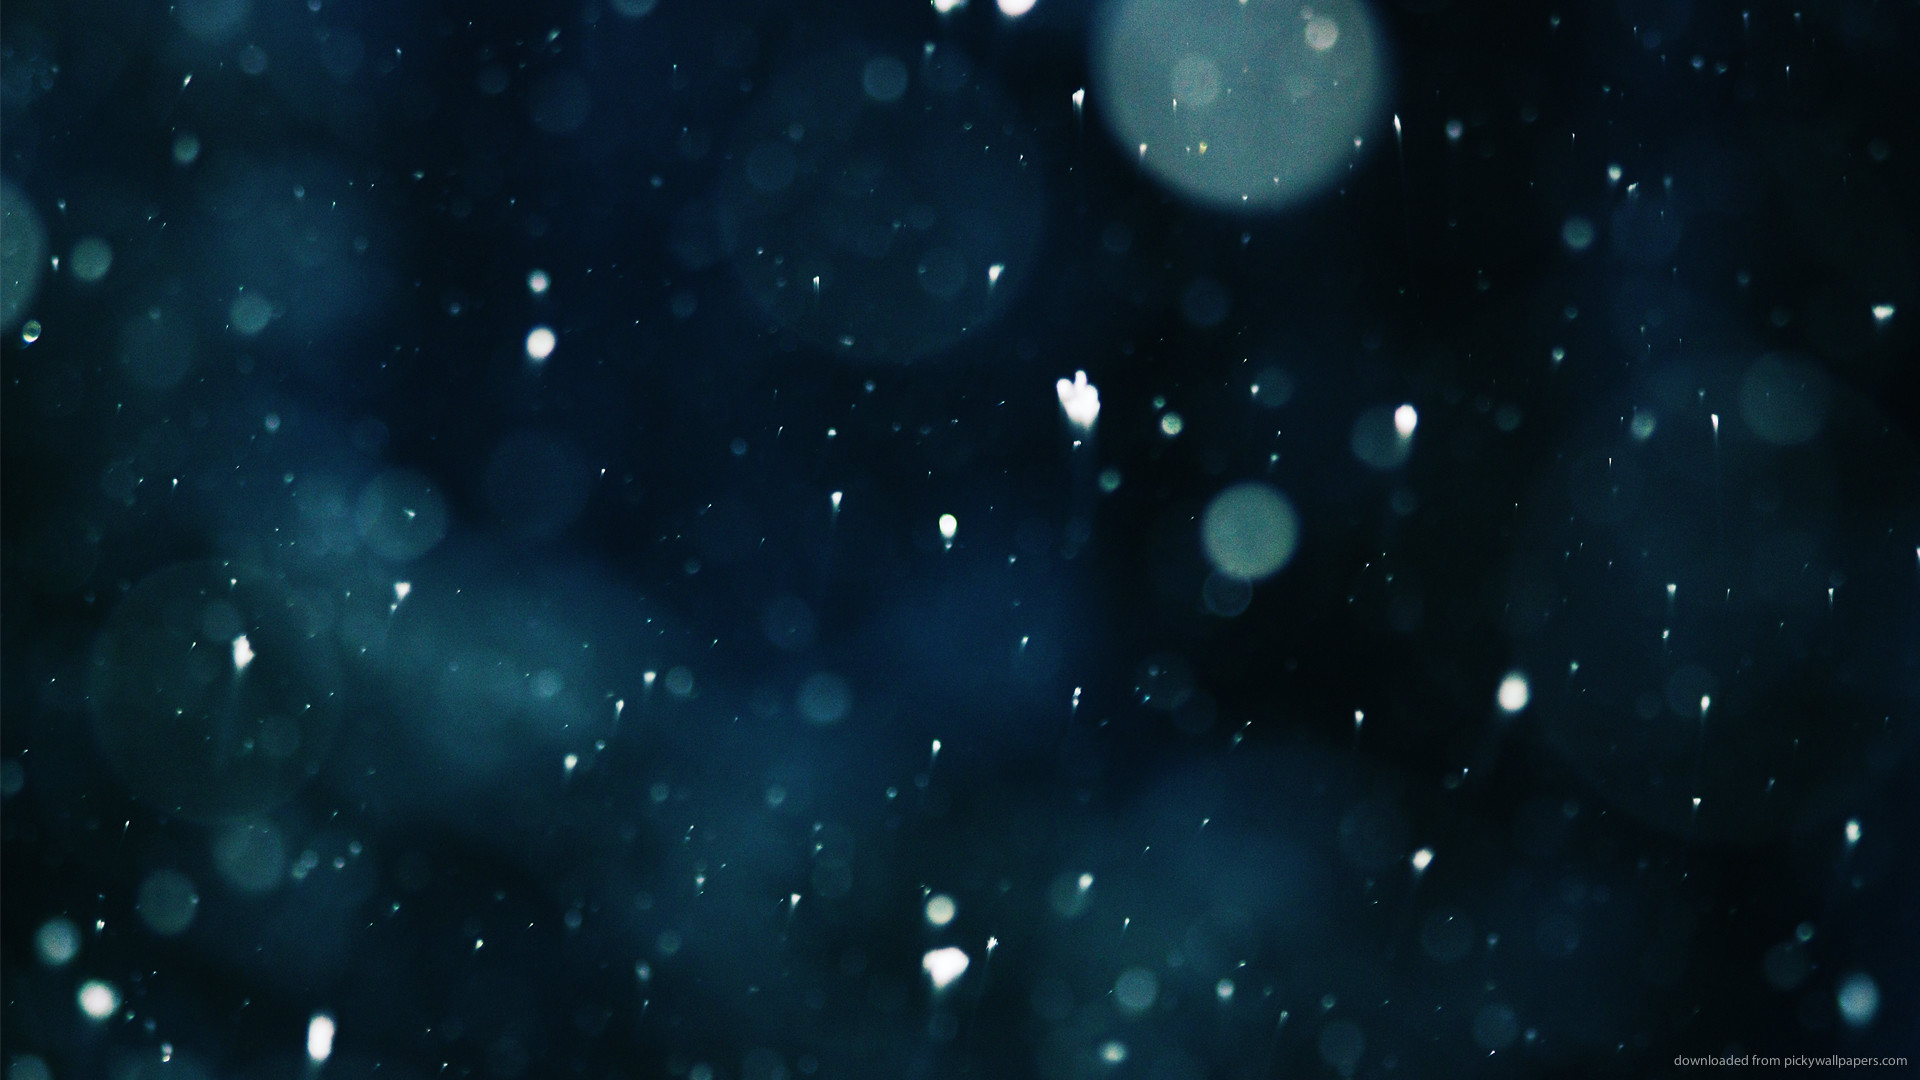 Snowflakes in a dark blue environment for 1920×1080